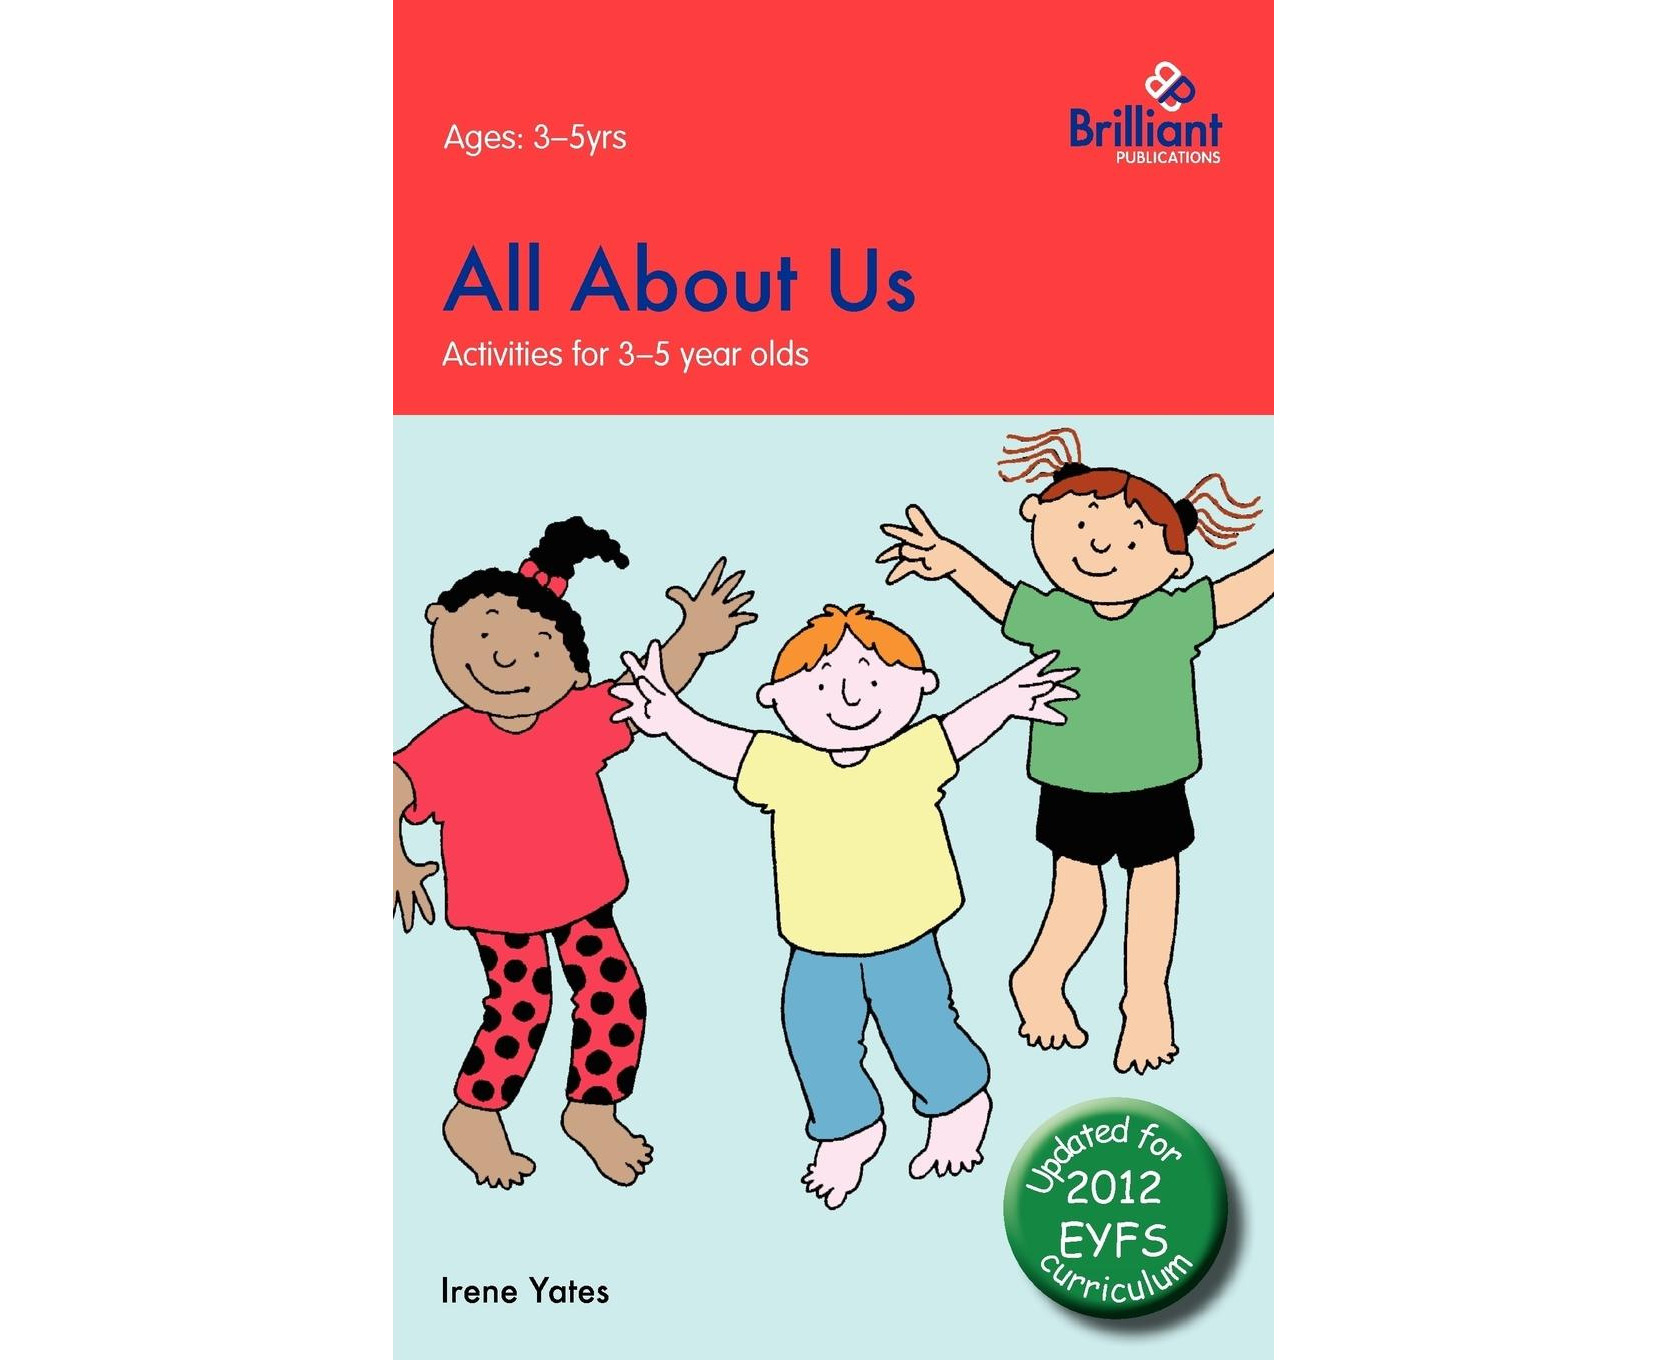 all-about-us-activities-for-3-5-year-olds-2nd-edition-catch-au